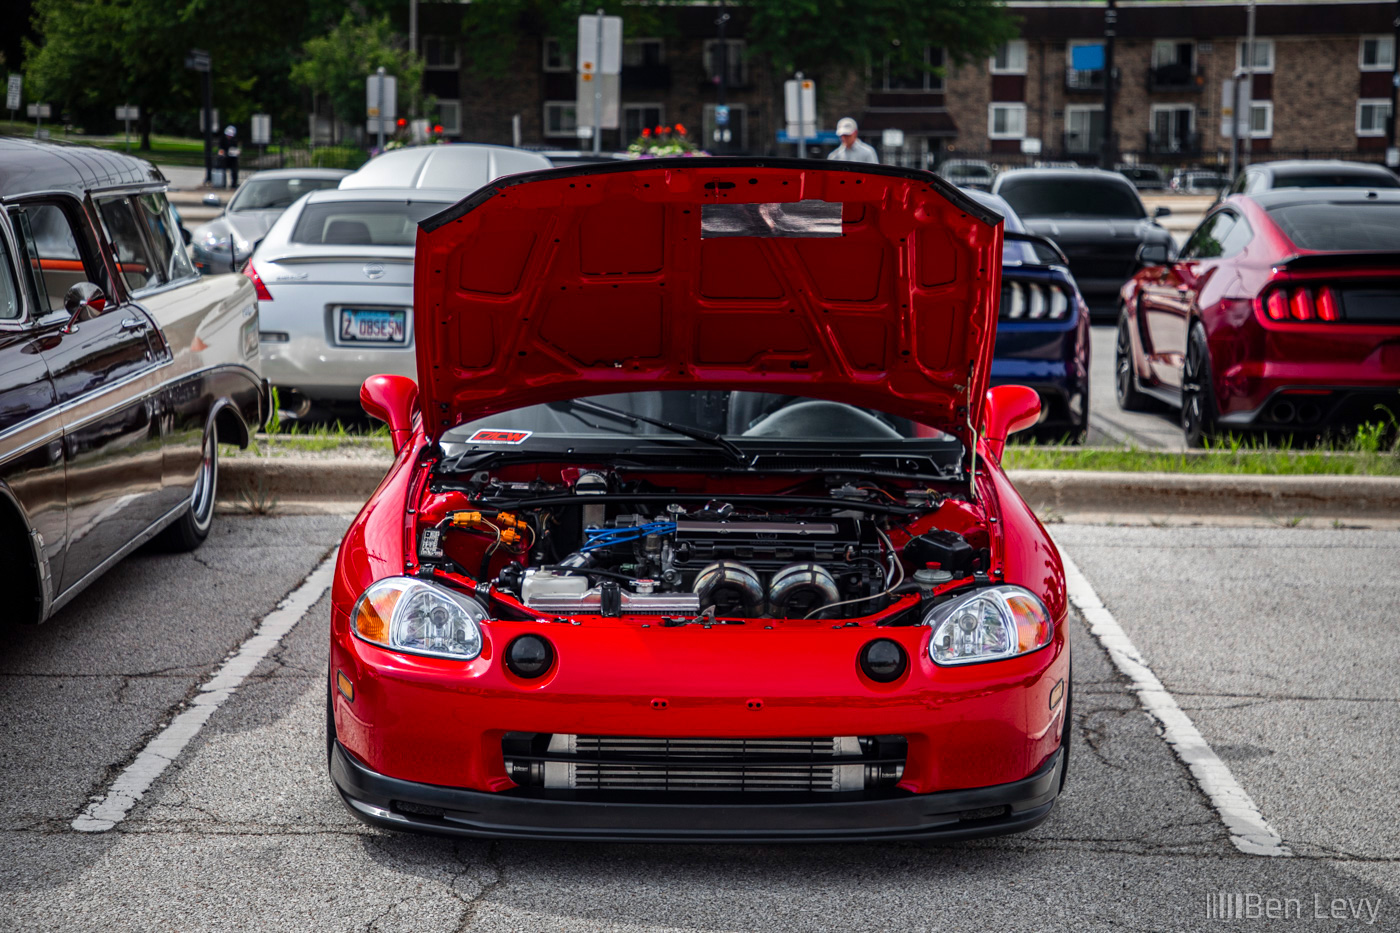 Turbocharged Honda del Sol with the Hood Open